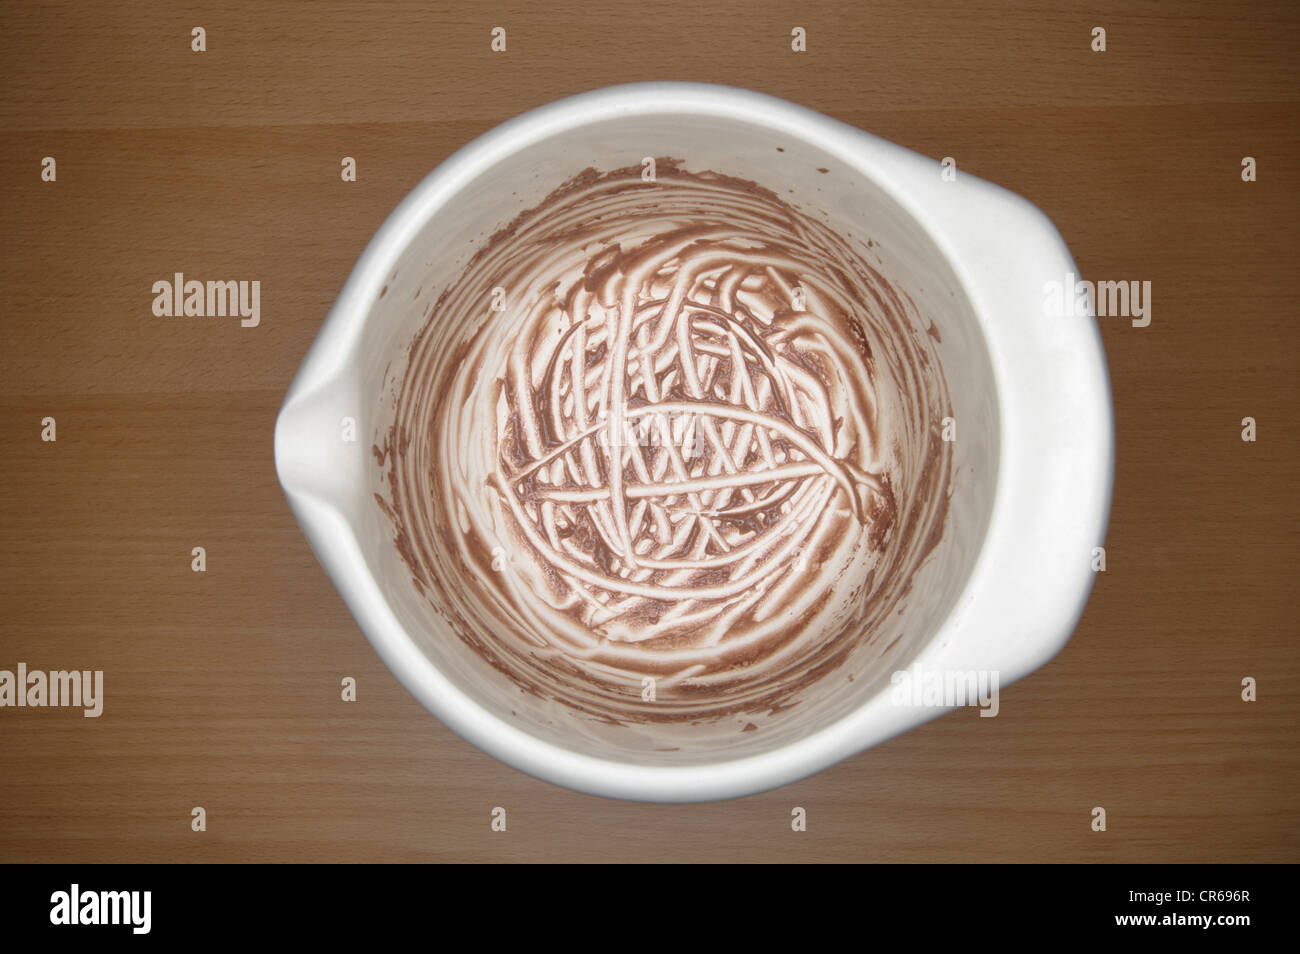 Licked out dish of chocolate pudding on wooden table, close up Stock Photo